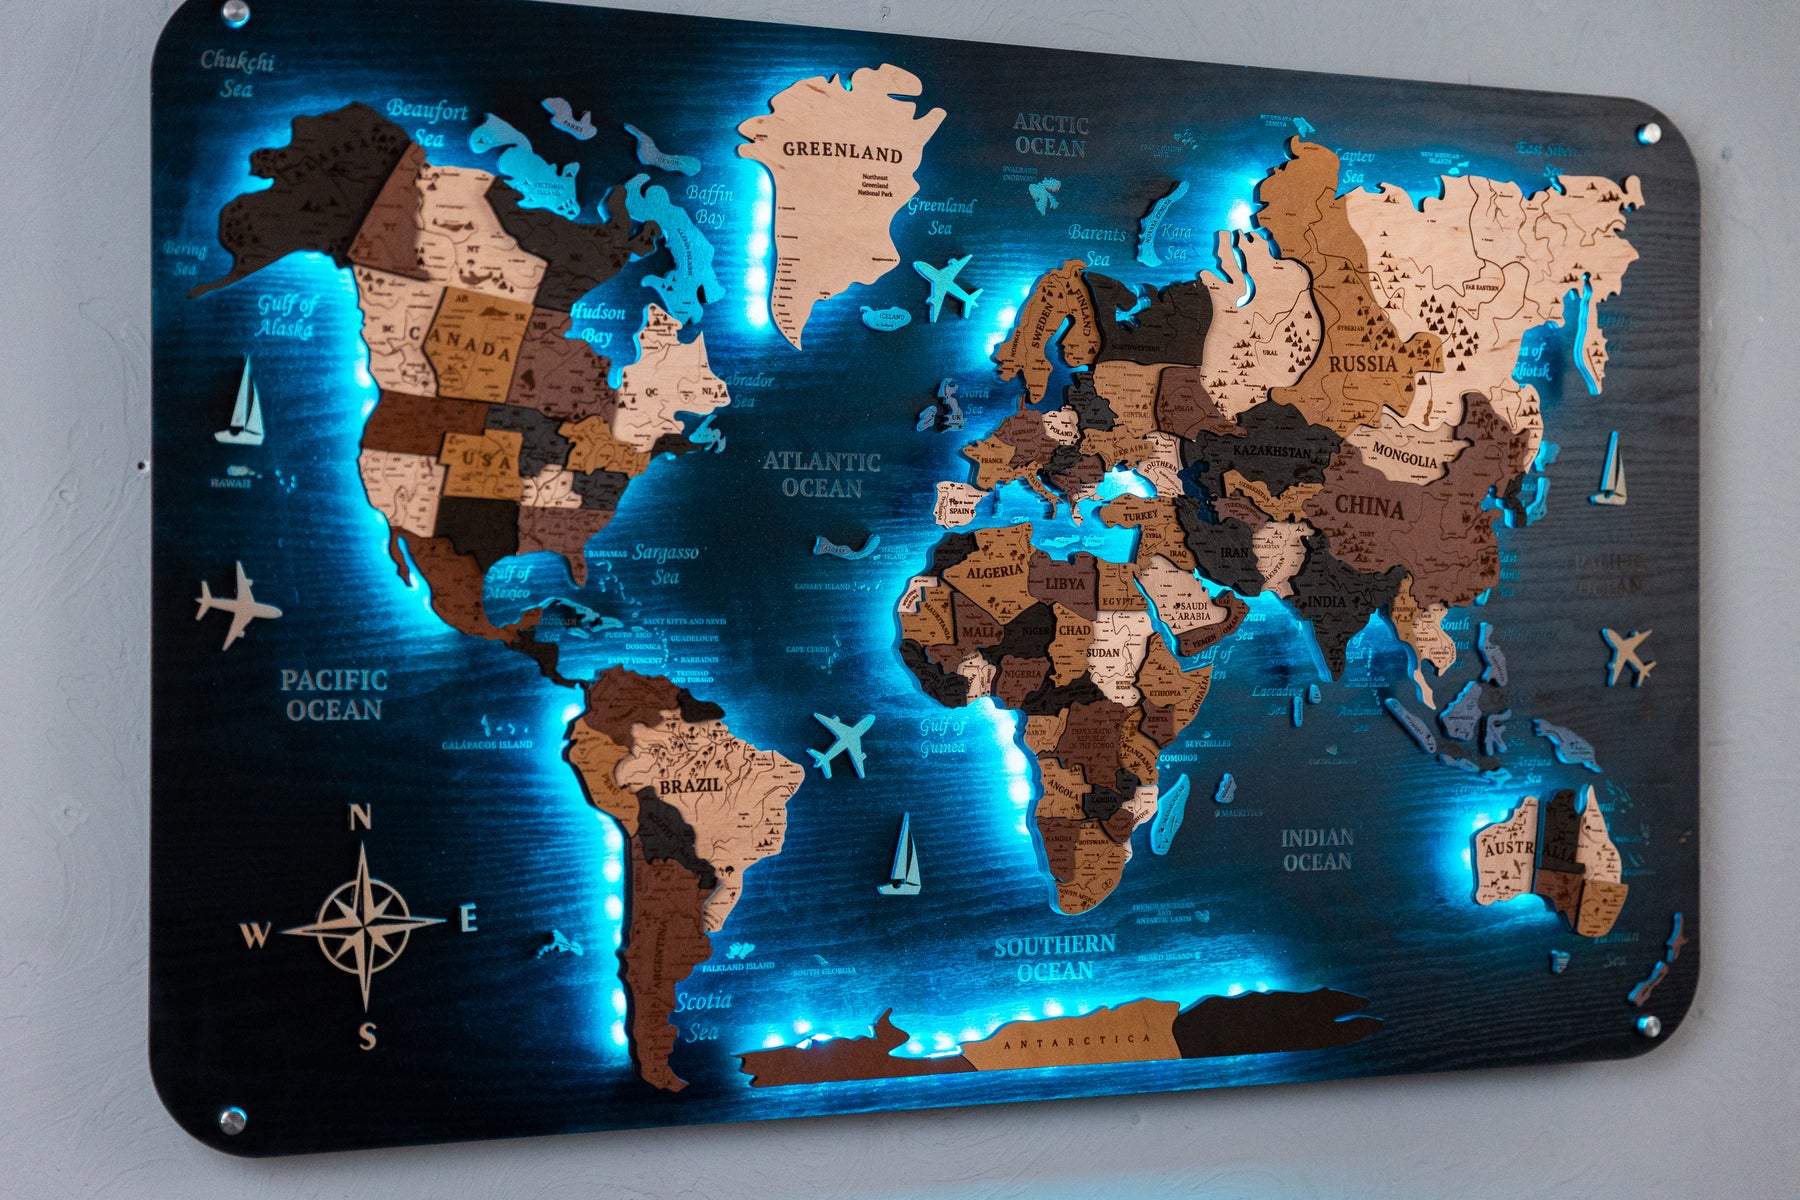 3D LED Wooden Map of the World RGB LED 3D Wooden World Map -  Norway